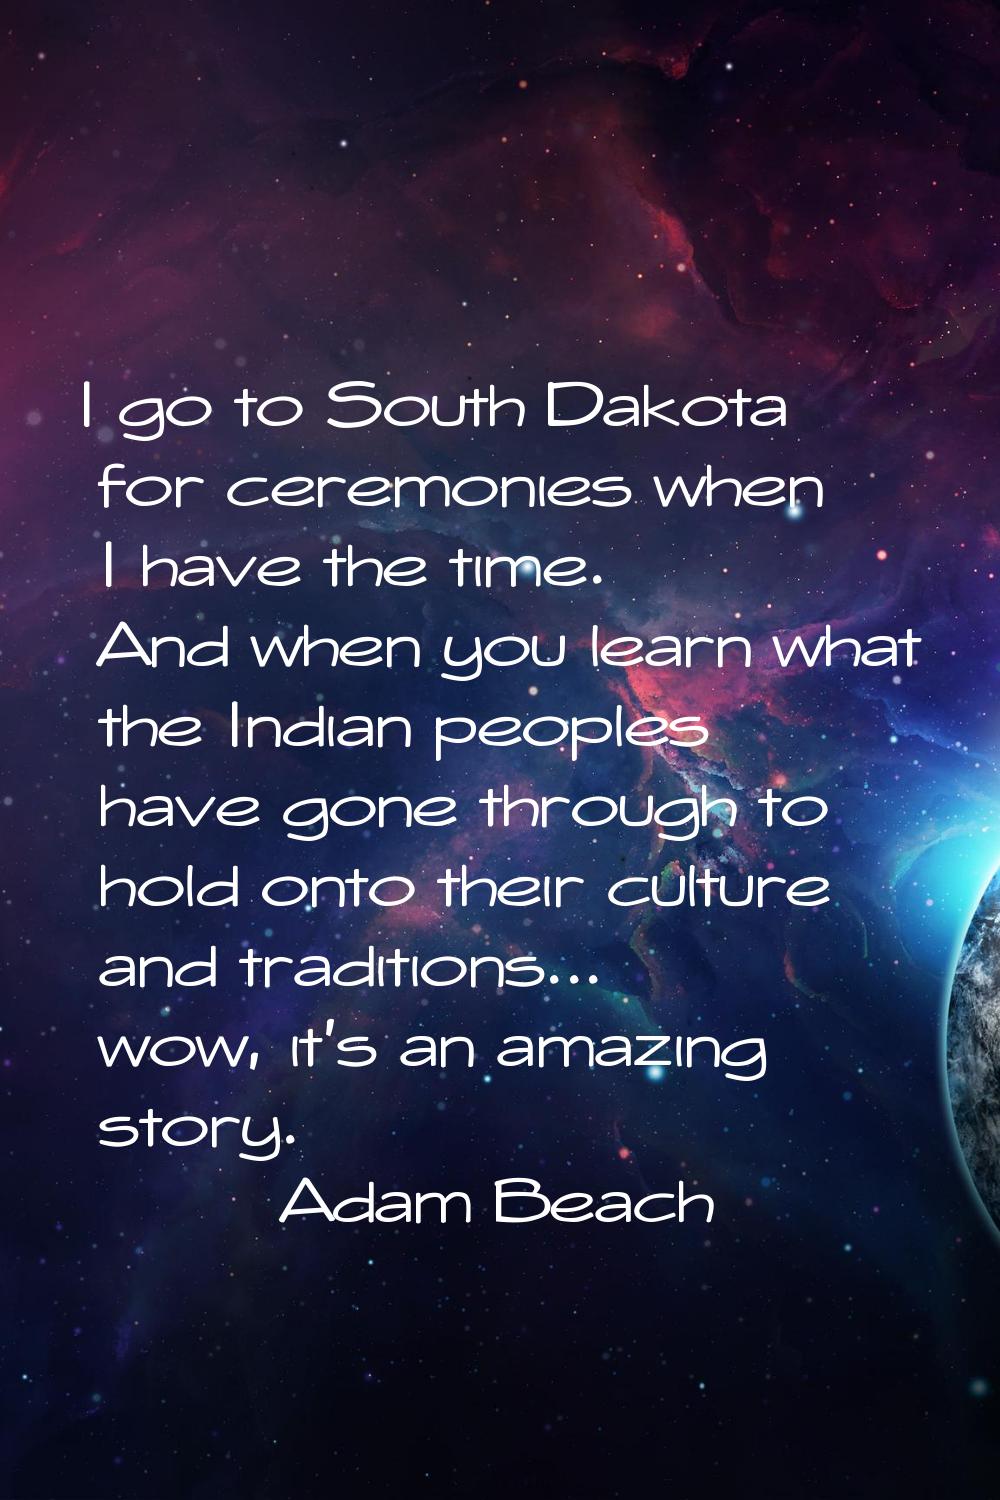 I go to South Dakota for ceremonies when I have the time. And when you learn what the Indian people